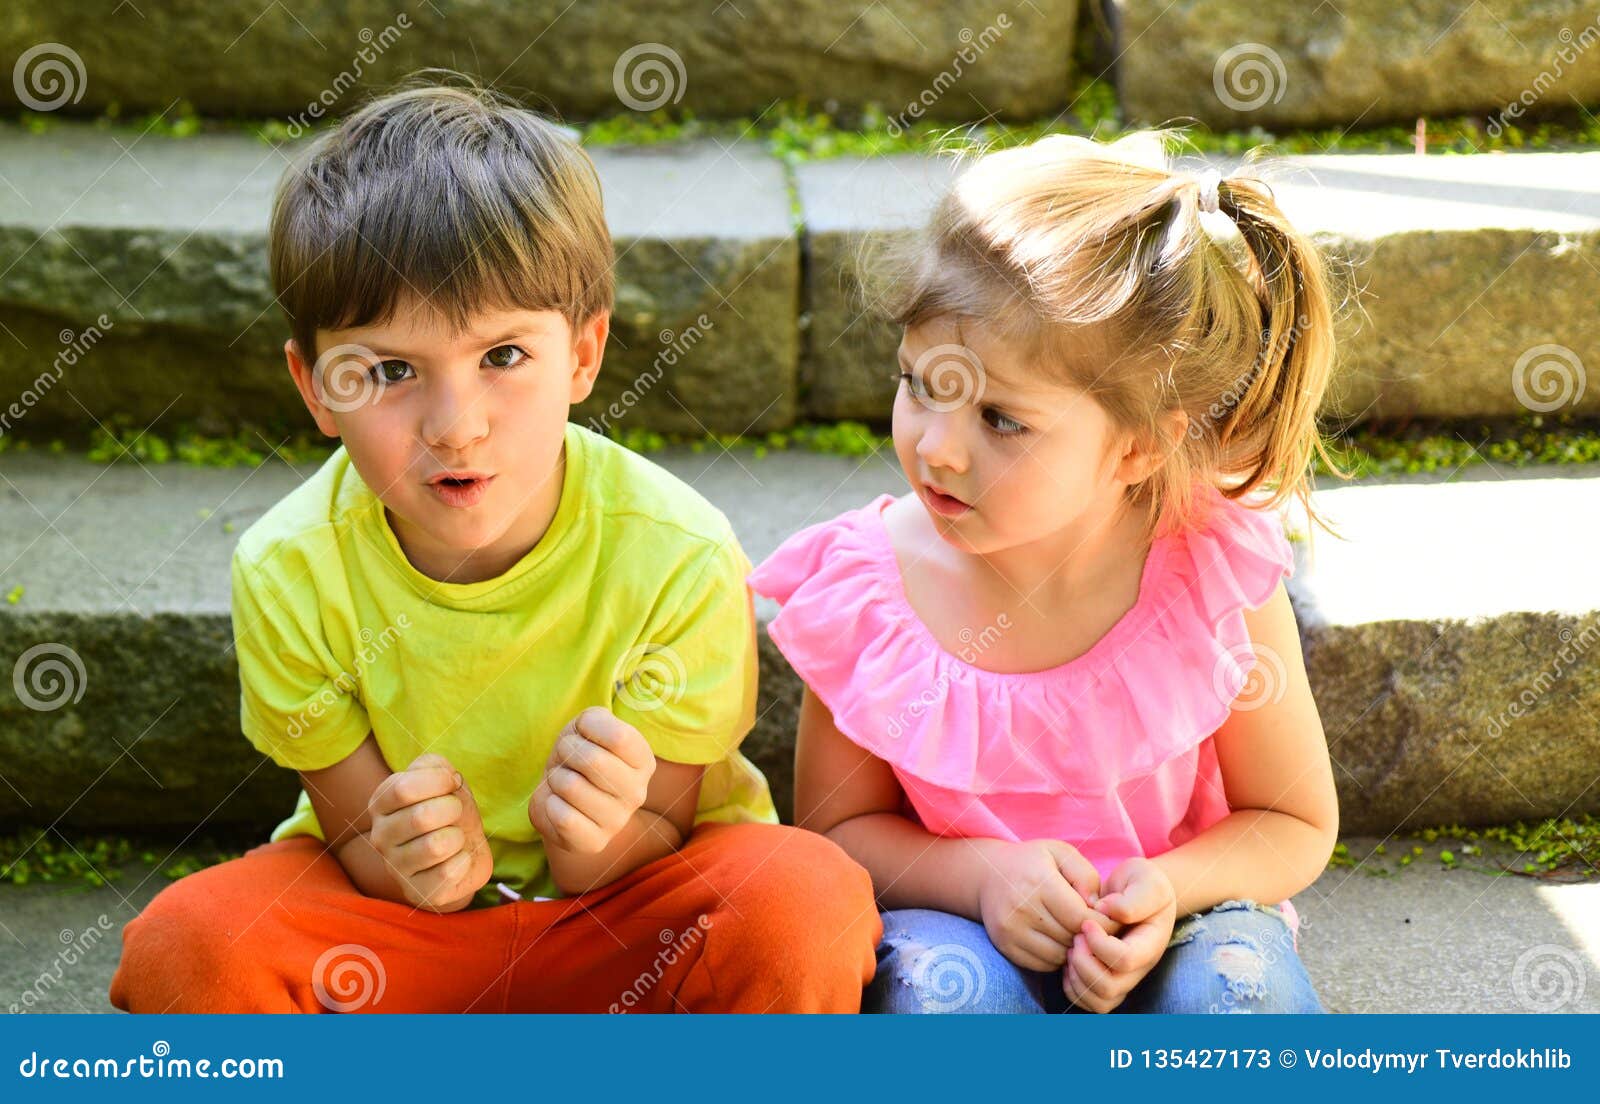 931 Little Boy Girl Best Friends Photos Free Royalty Free Stock Photos From Dreamstime